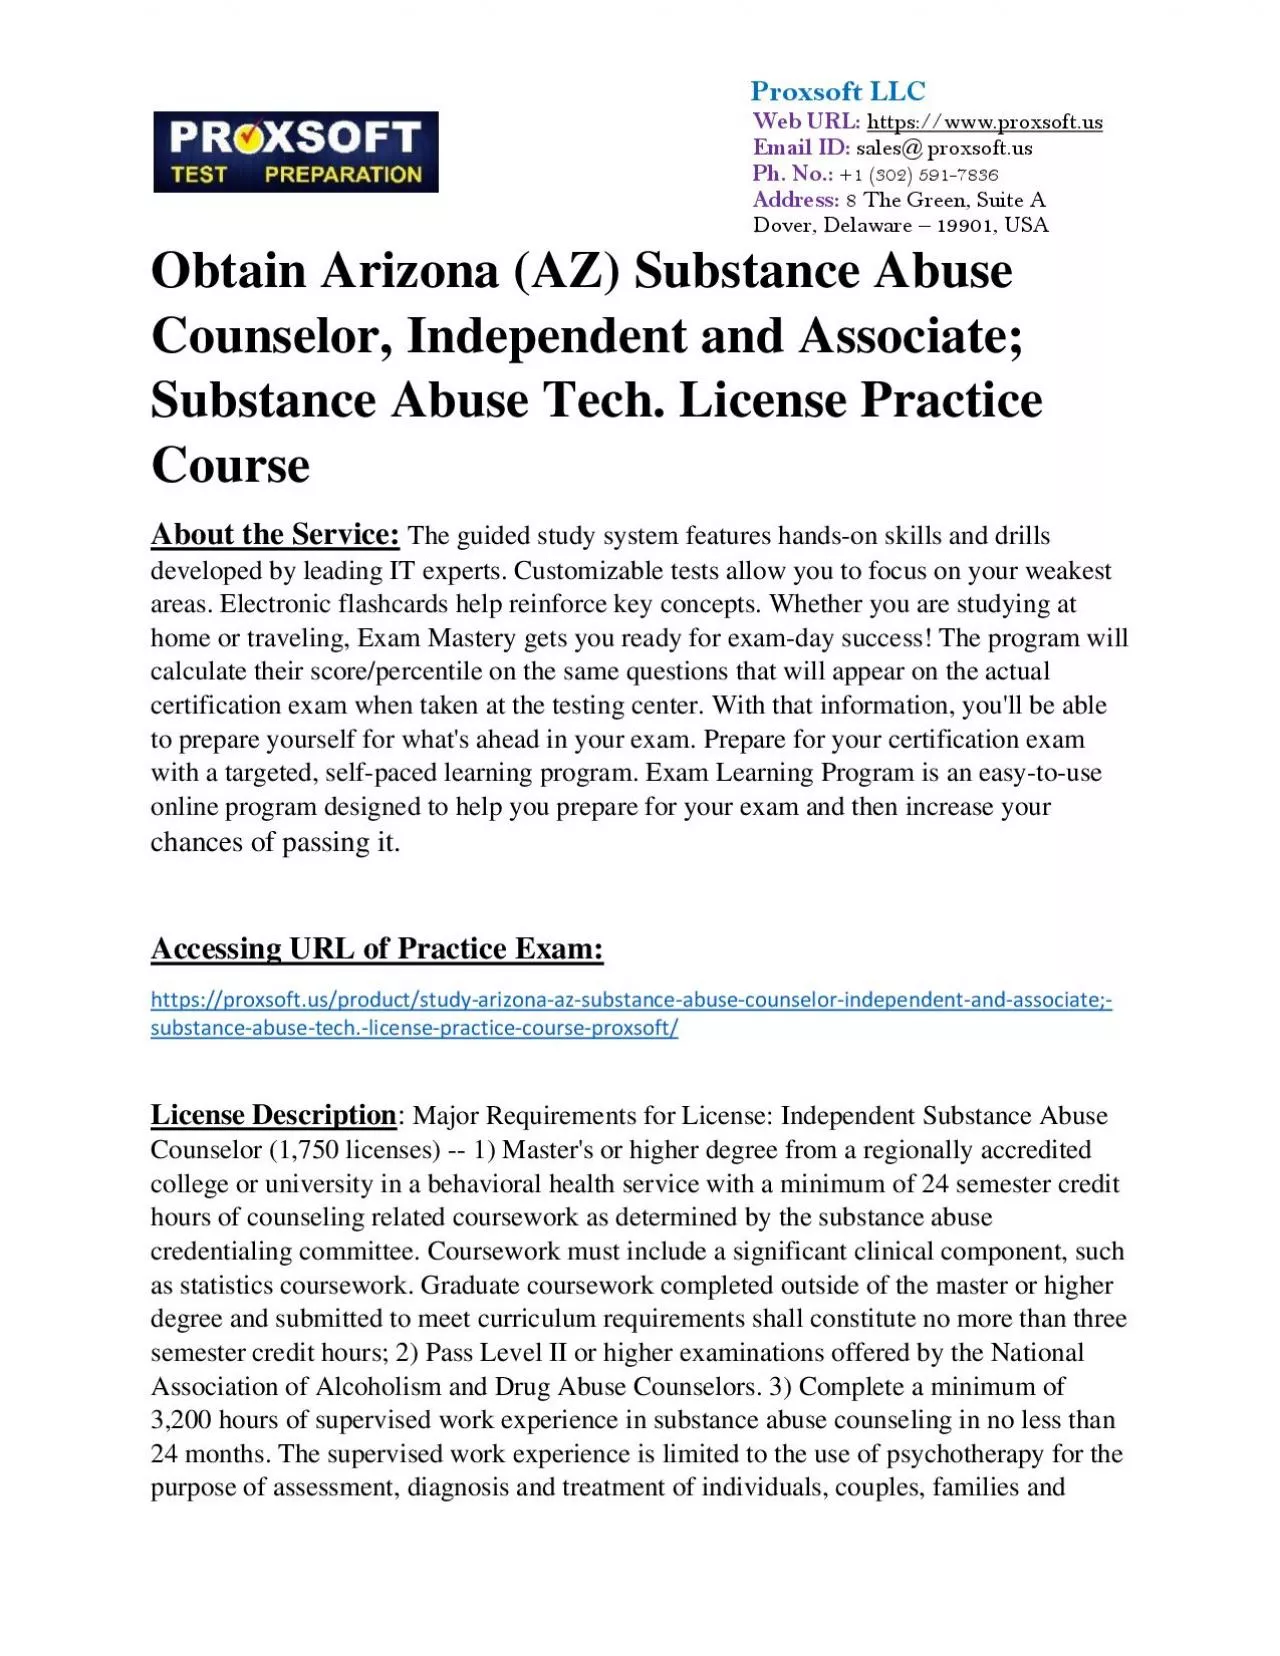 Obtain Arizona (AZ) Substance Abuse Counselor, Independent and Associate; Substance Abuse